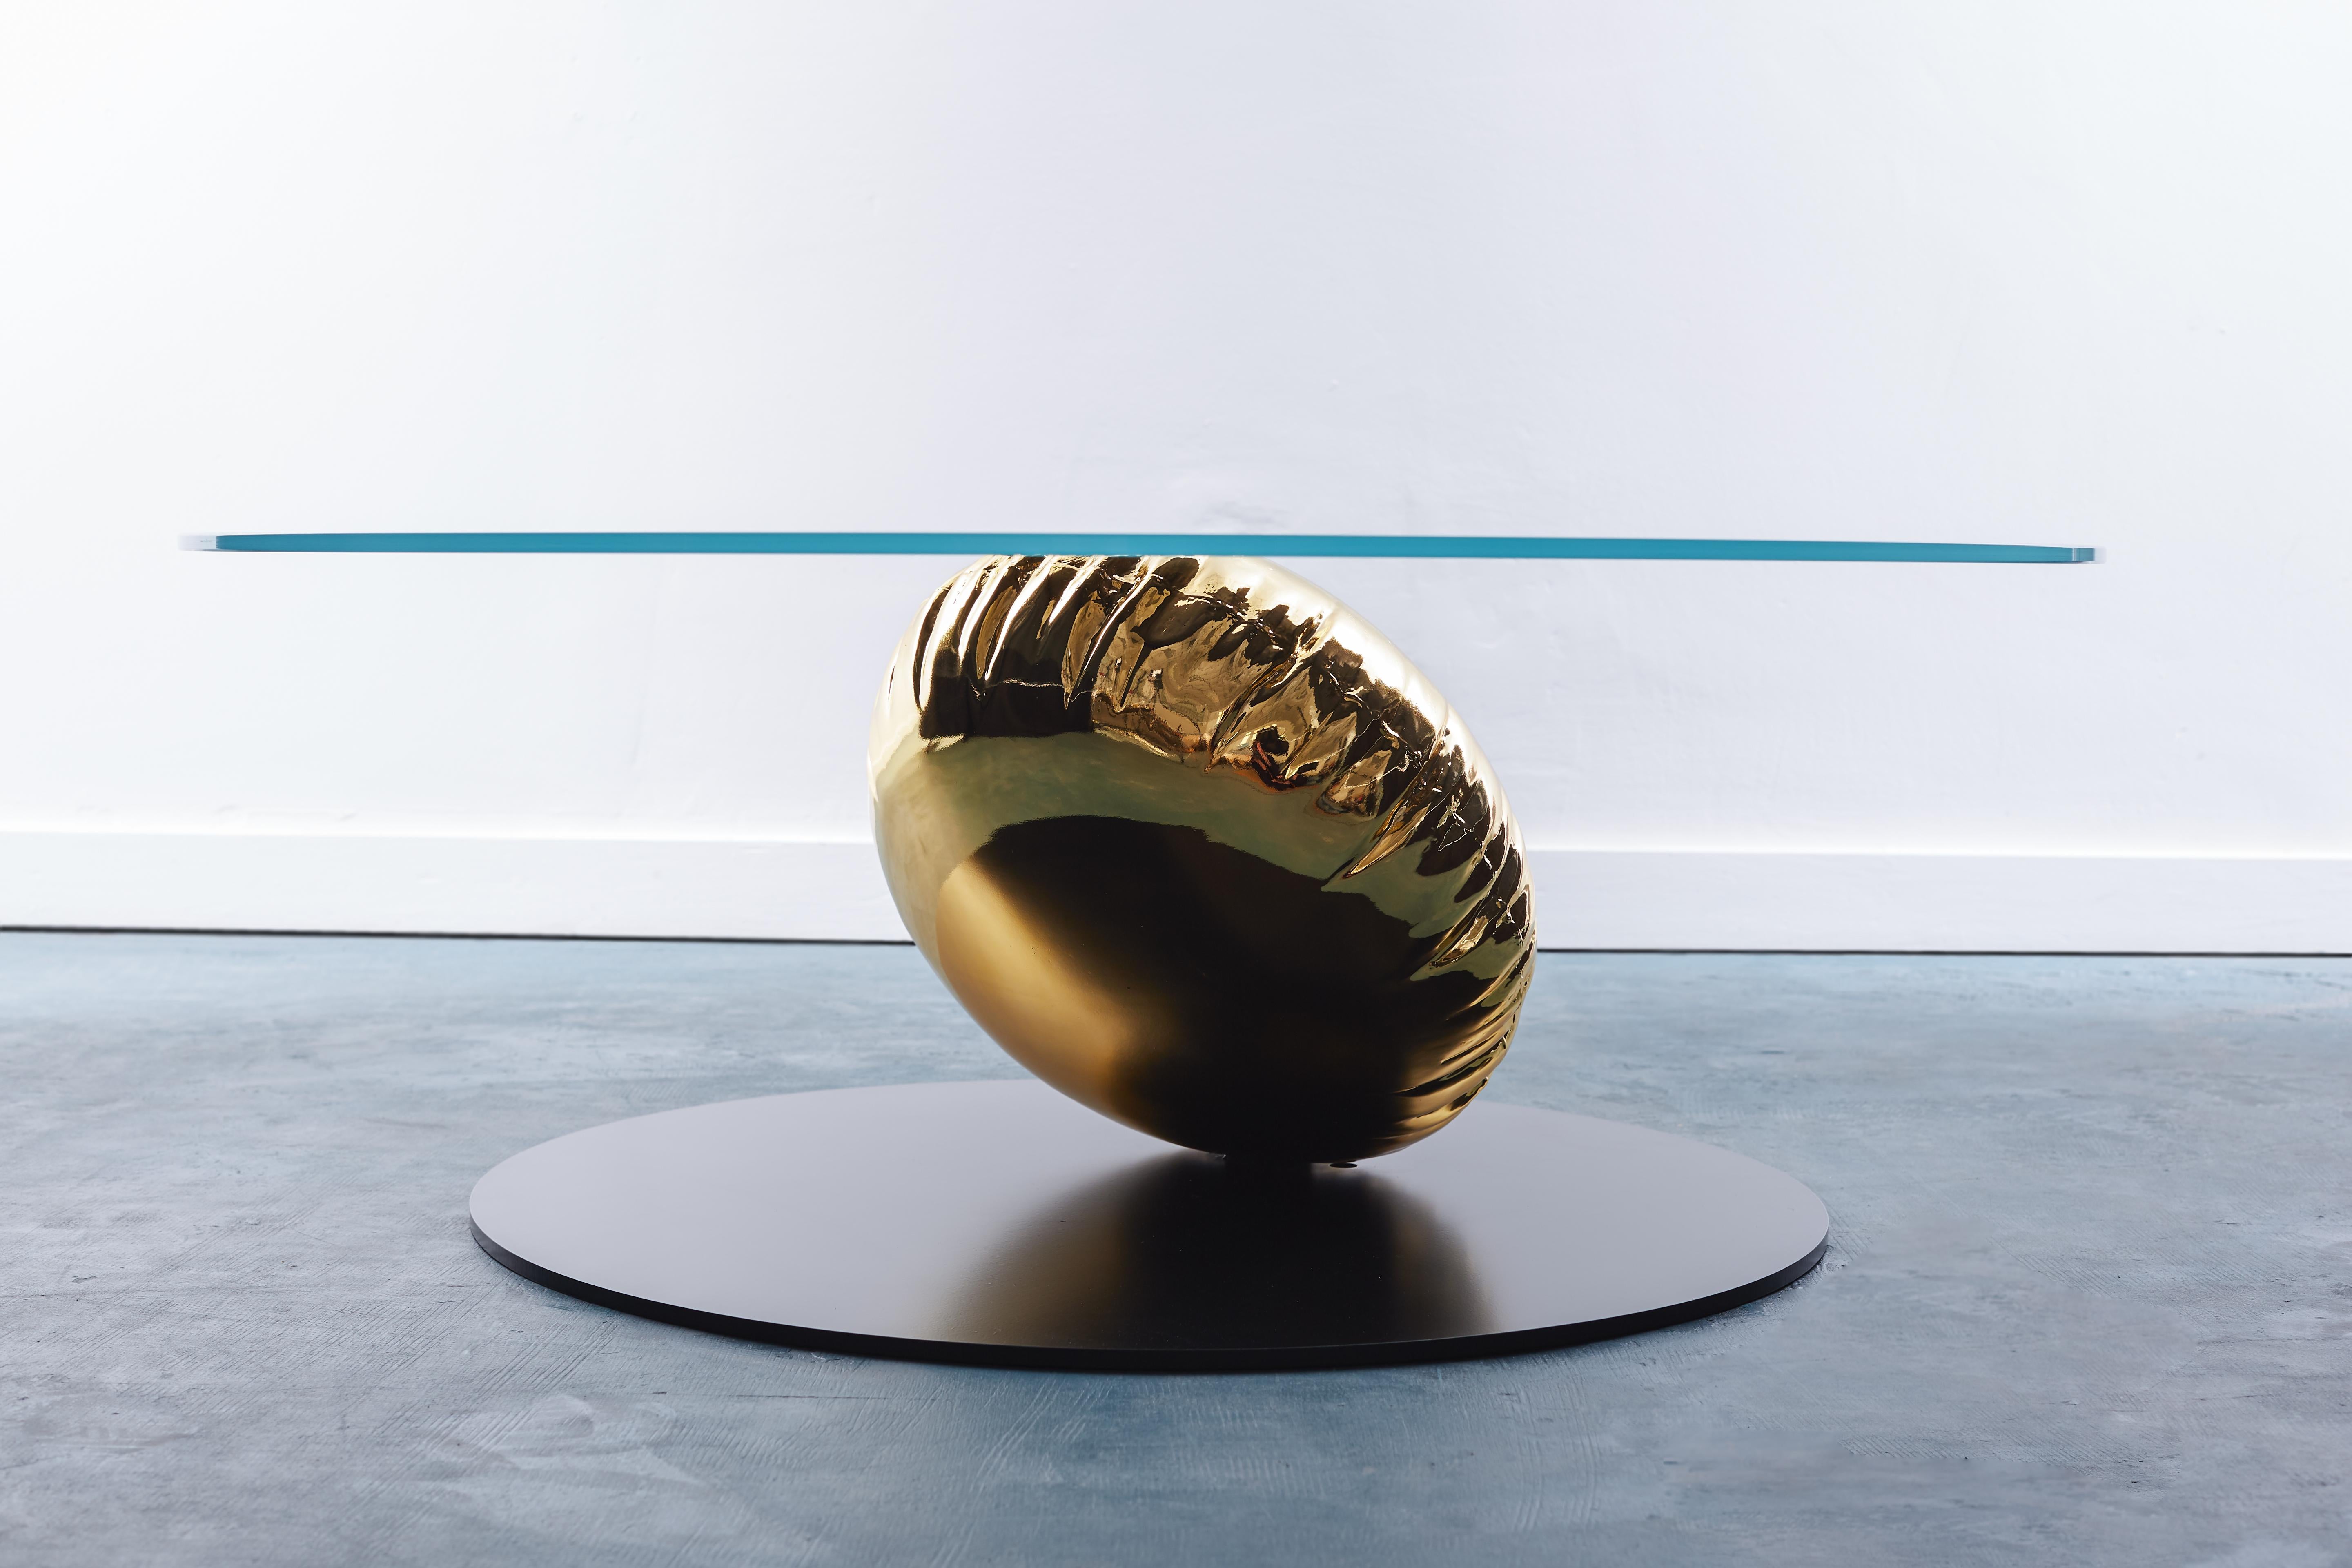 Gold Balance Coffee Table by Duffy London
Limited Edition
Dimensions: D 110 x H 47 cm
Materials: Glass, Resin, Stainless Steel, Steel.
Base available in black matte or raw metal clear lacquered finish. Balloon available in gold, silver or blue